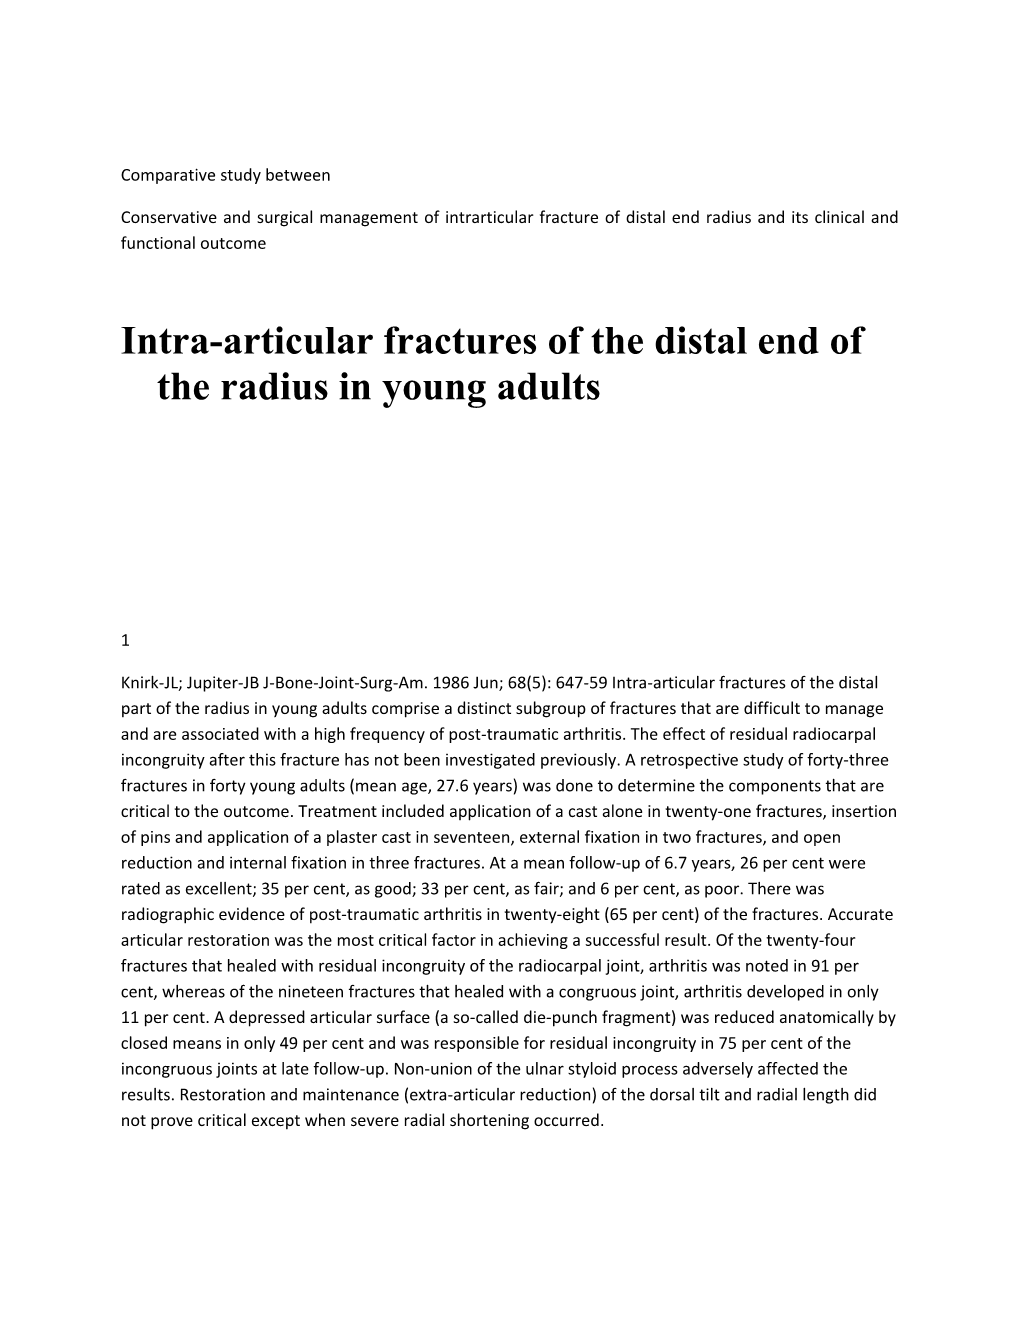 Intra-Articular Fractures of the Distal End of the Radius in Young Adults